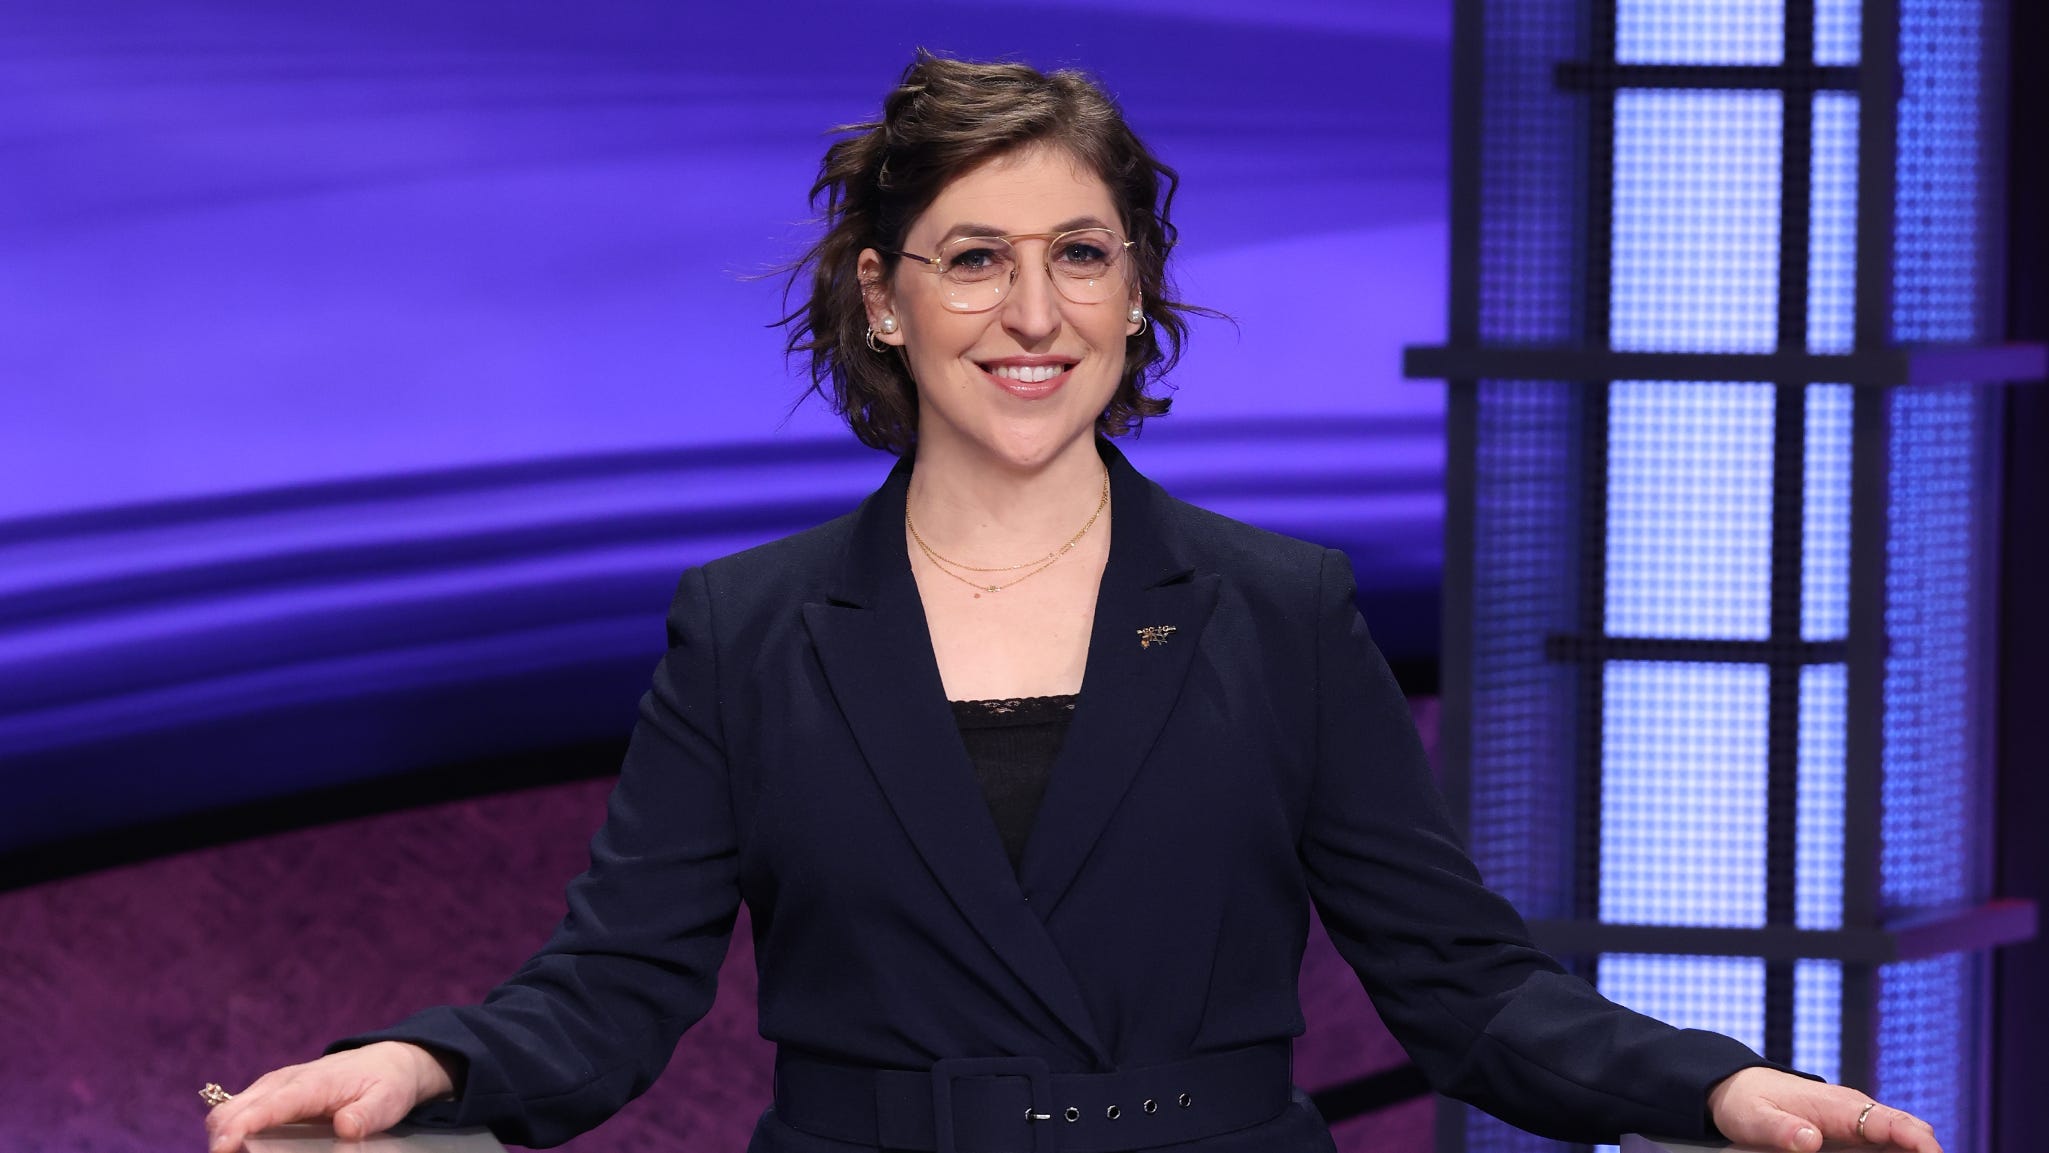 Mayim Bialik, co-host of "Jeopardy!", has walked off the set in support of the striking Writers Guild of America.